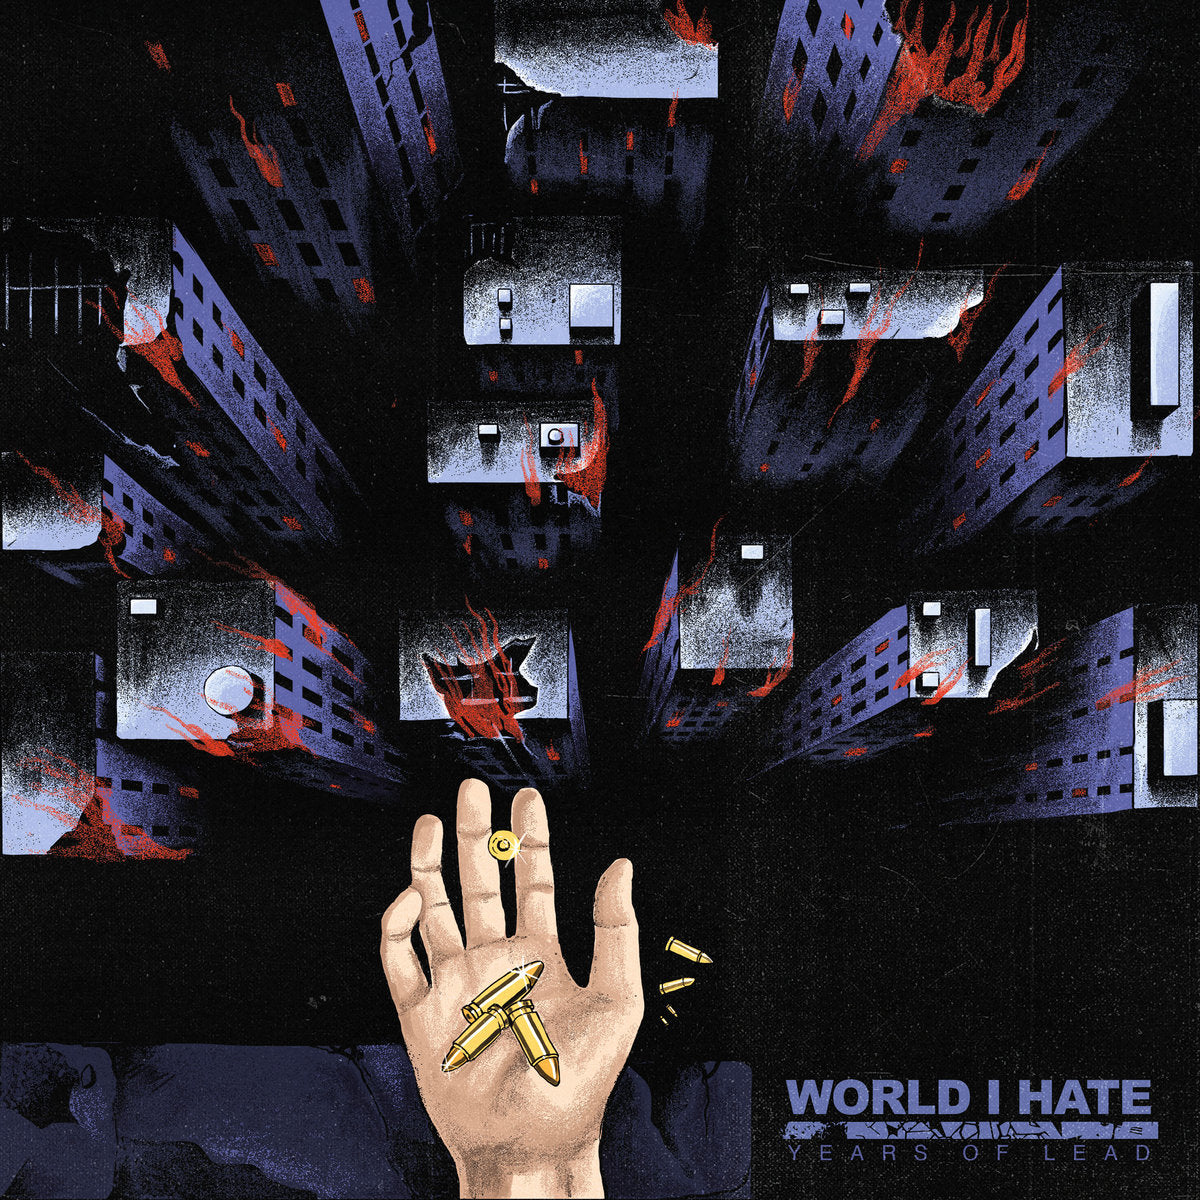 World I Hate  "Years Of Lead" LP